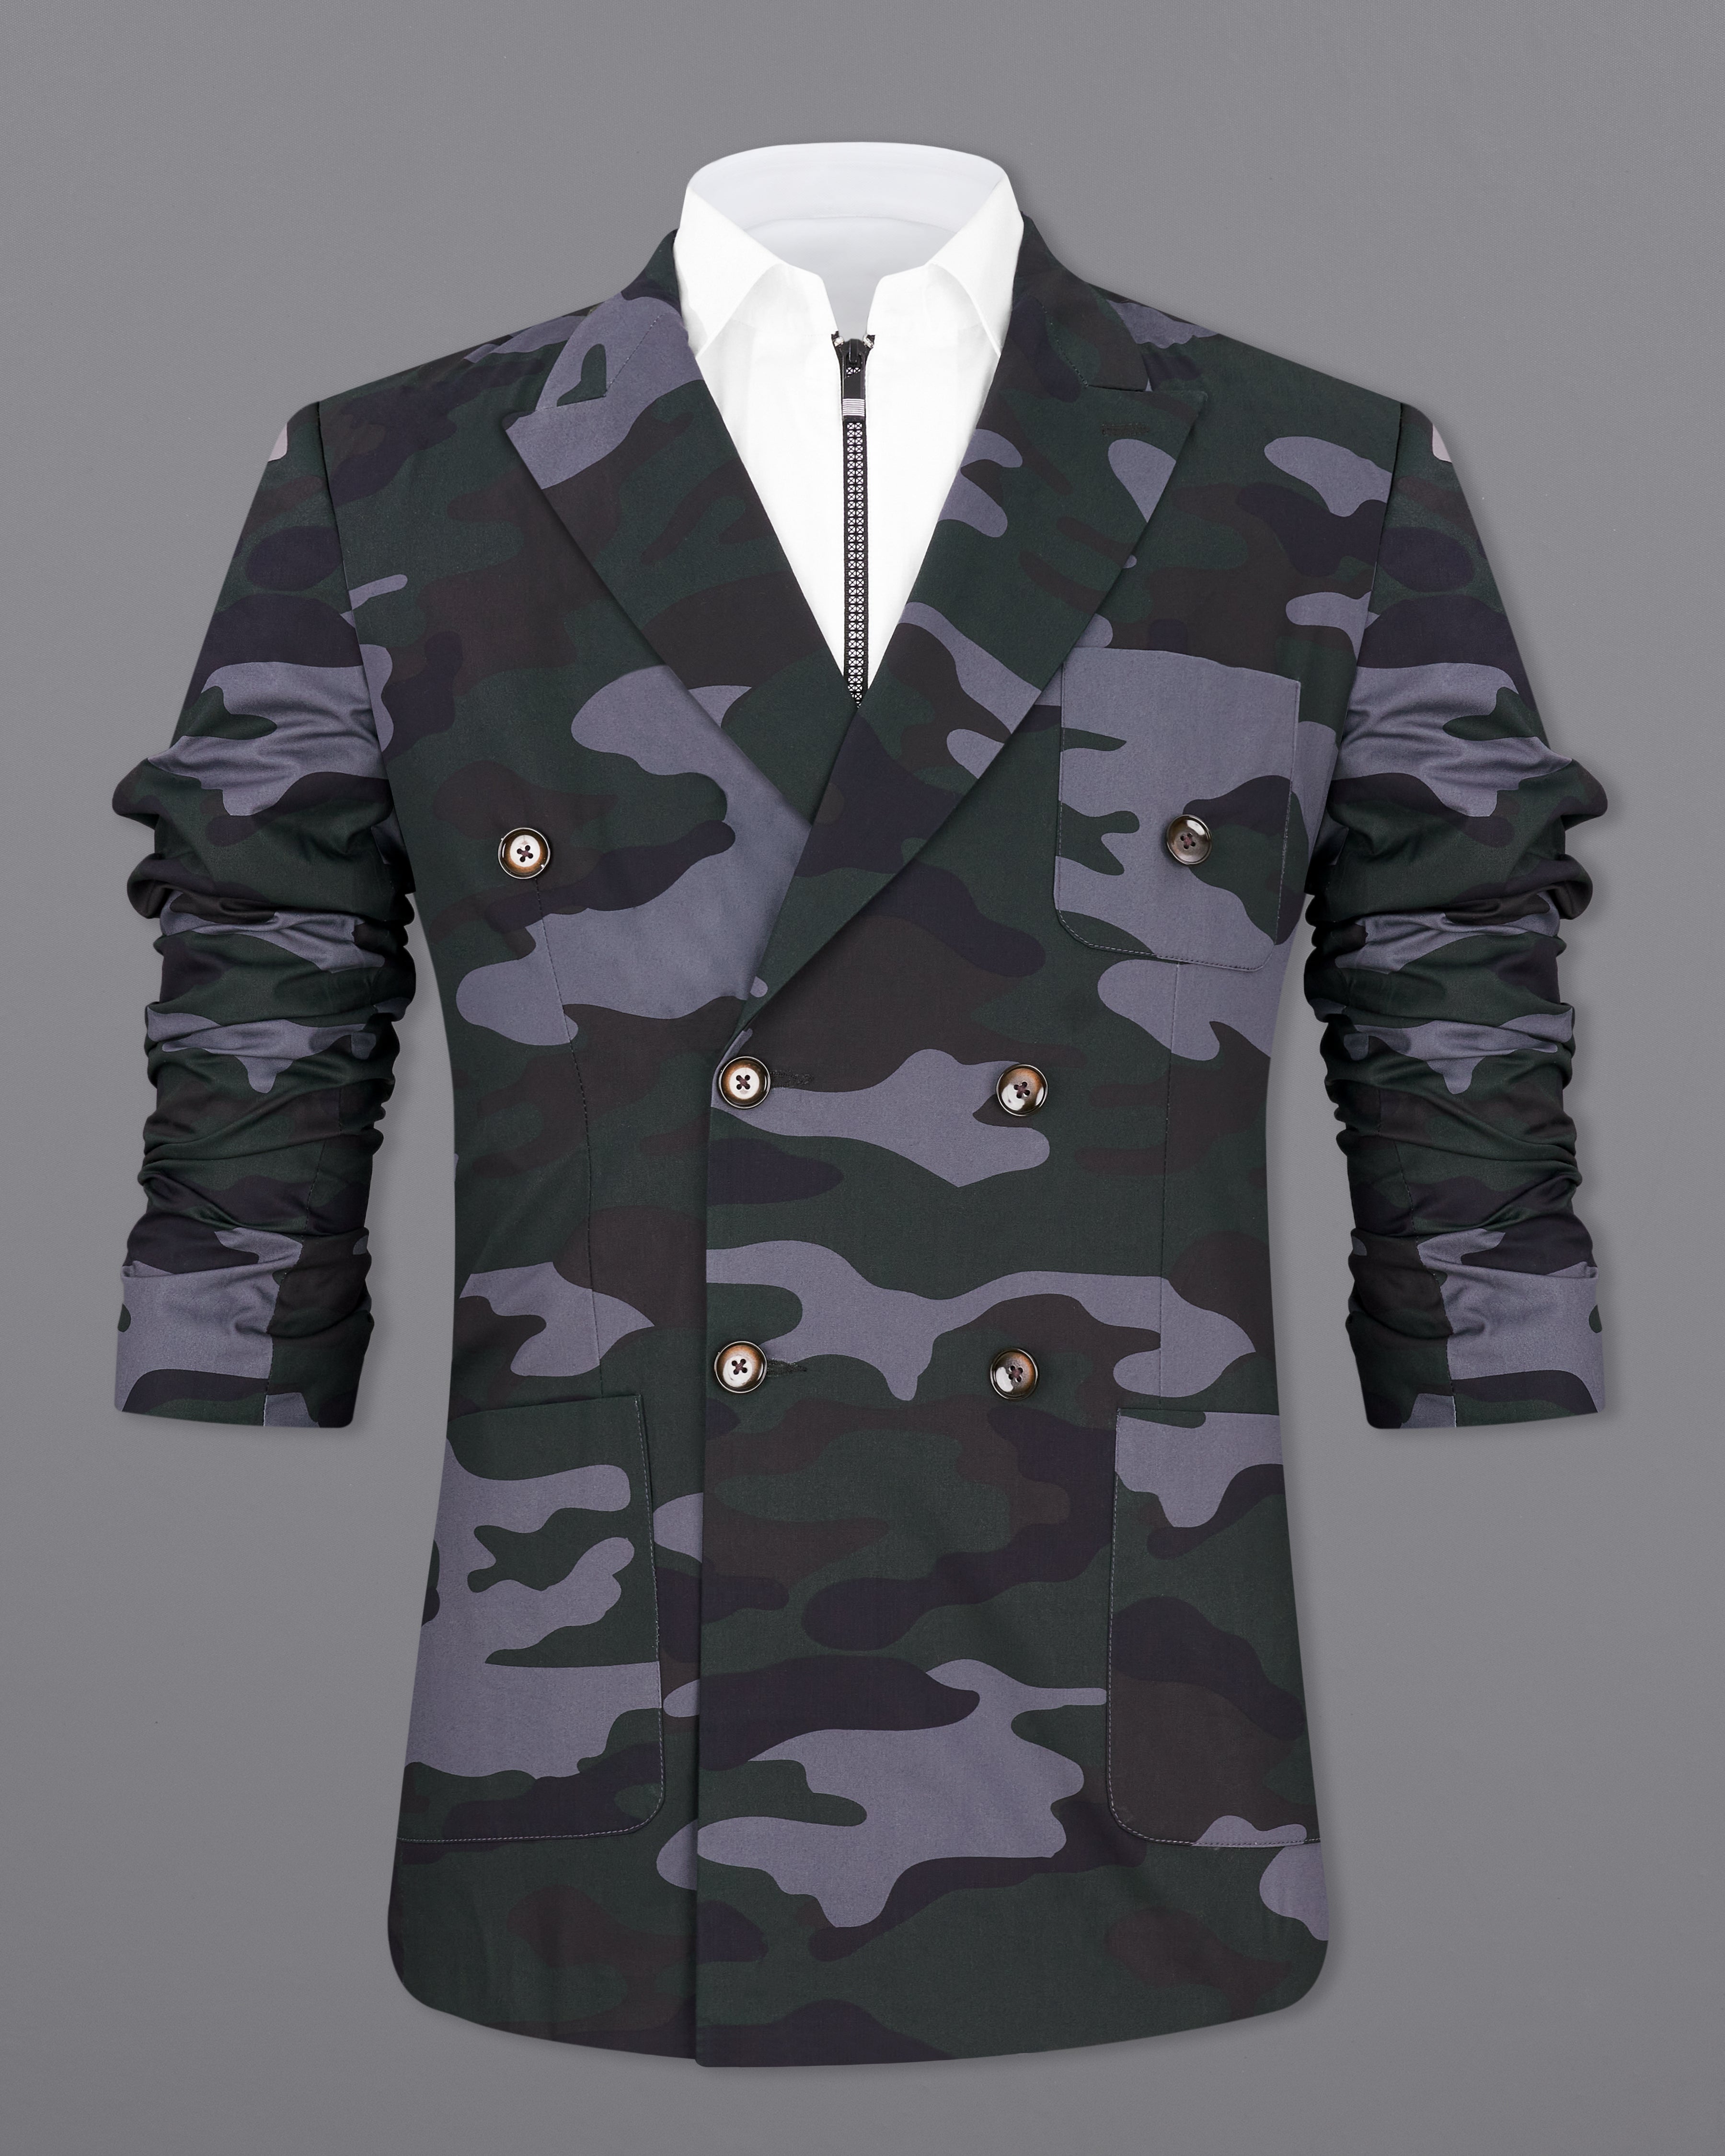 Baltic Green with Pale Gray Camouflage Premium Cotton Double Breasted Designer Sports Blazer BL2300-DB-PP-36, BL2300-DB-PP-38, BL2300-DB-PP-40, BL2300-DB-PP-42, BL2300-DB-PP-44, BL2300-DB-PP-46, BL2300-DB-PP-48, BL2300-DB-PP-50, BL2300-DB-PP-52, BL2300-DB-PP-54, BL2300-DB-PP-56, BL2300-DB-PP-58, BL2300-DB-PP-60